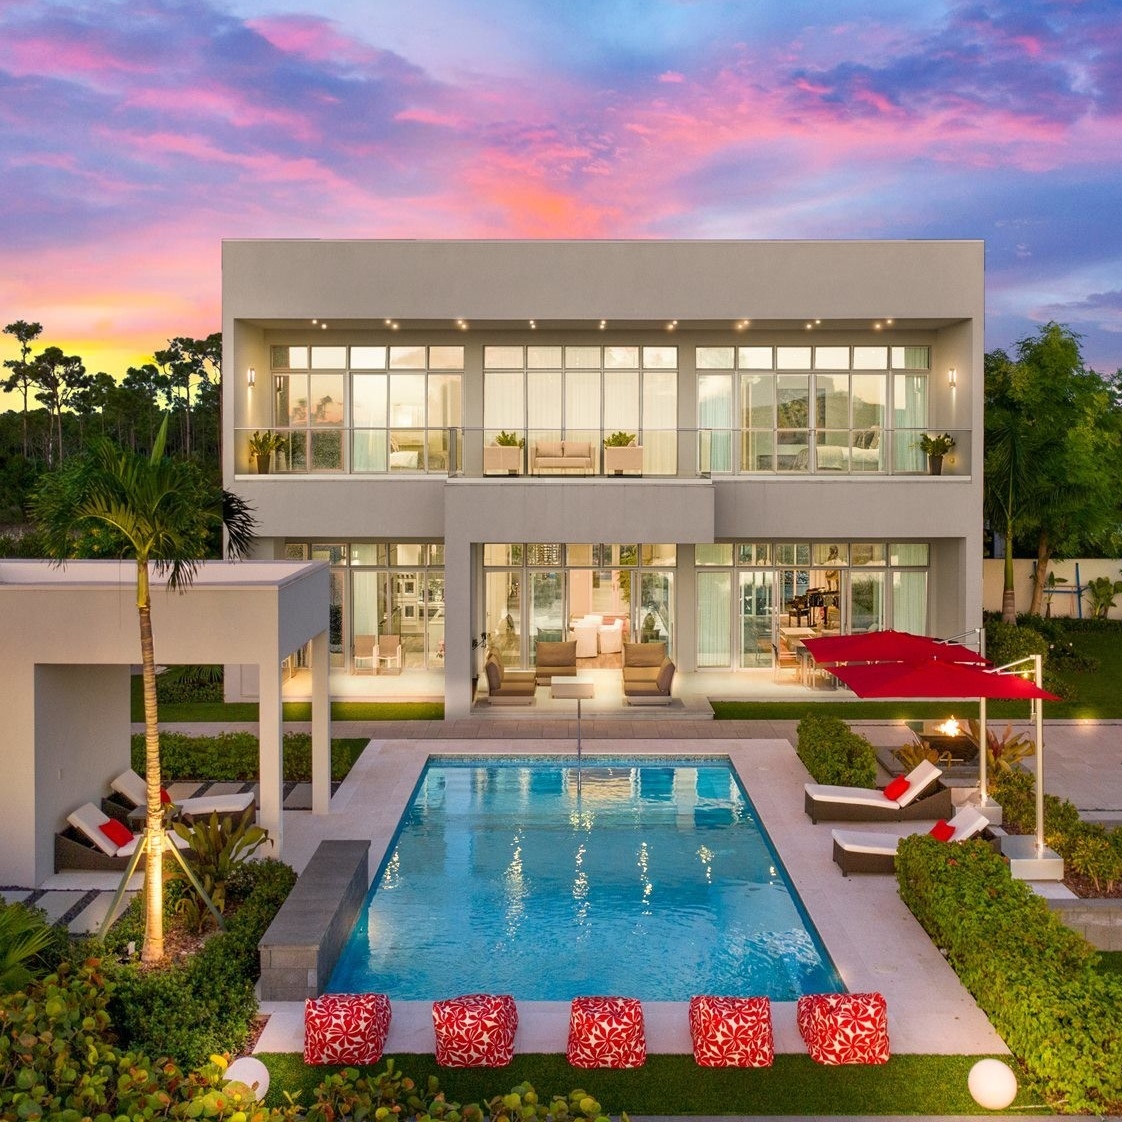 Top 5 Luxury Gated Communities in the Bahamas